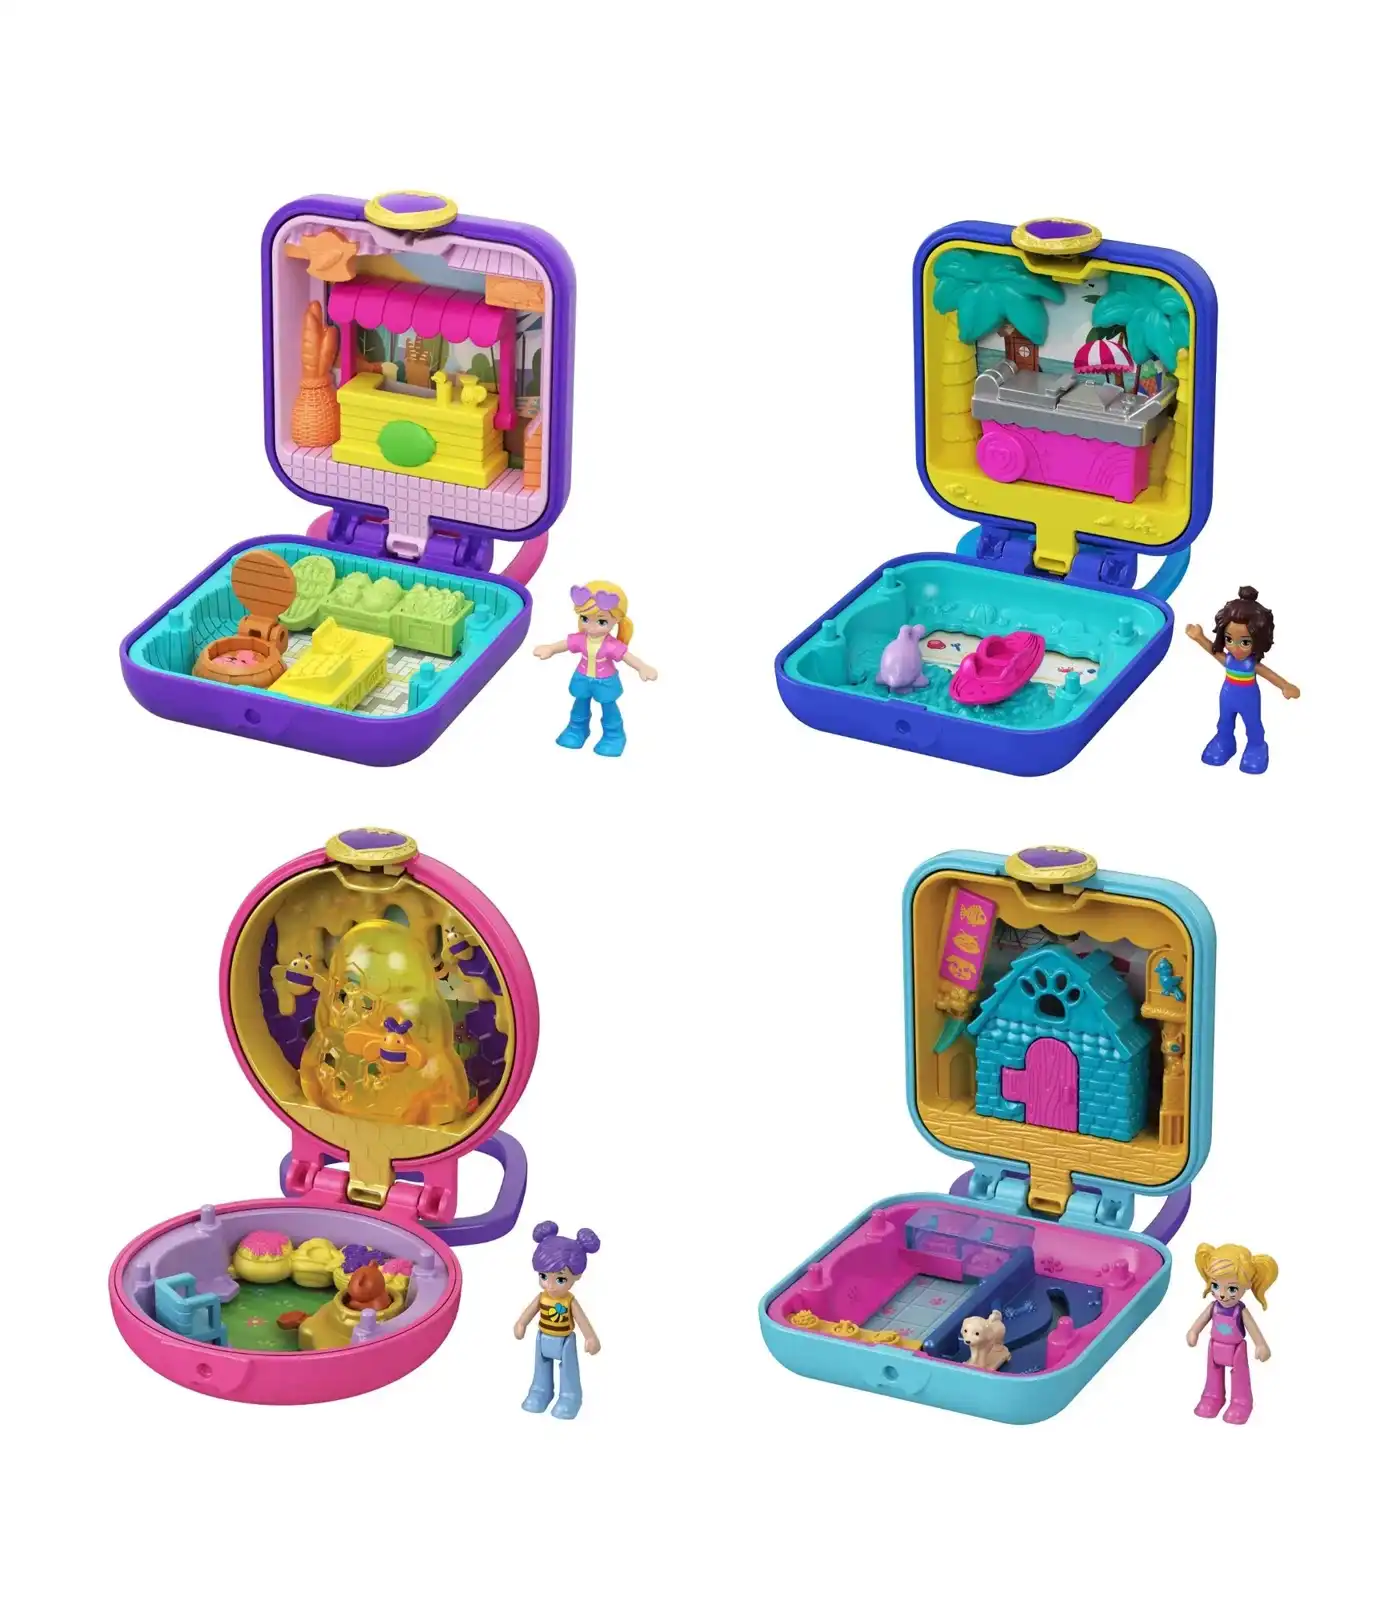 Polly Pocket Tiny Compact. Assorted